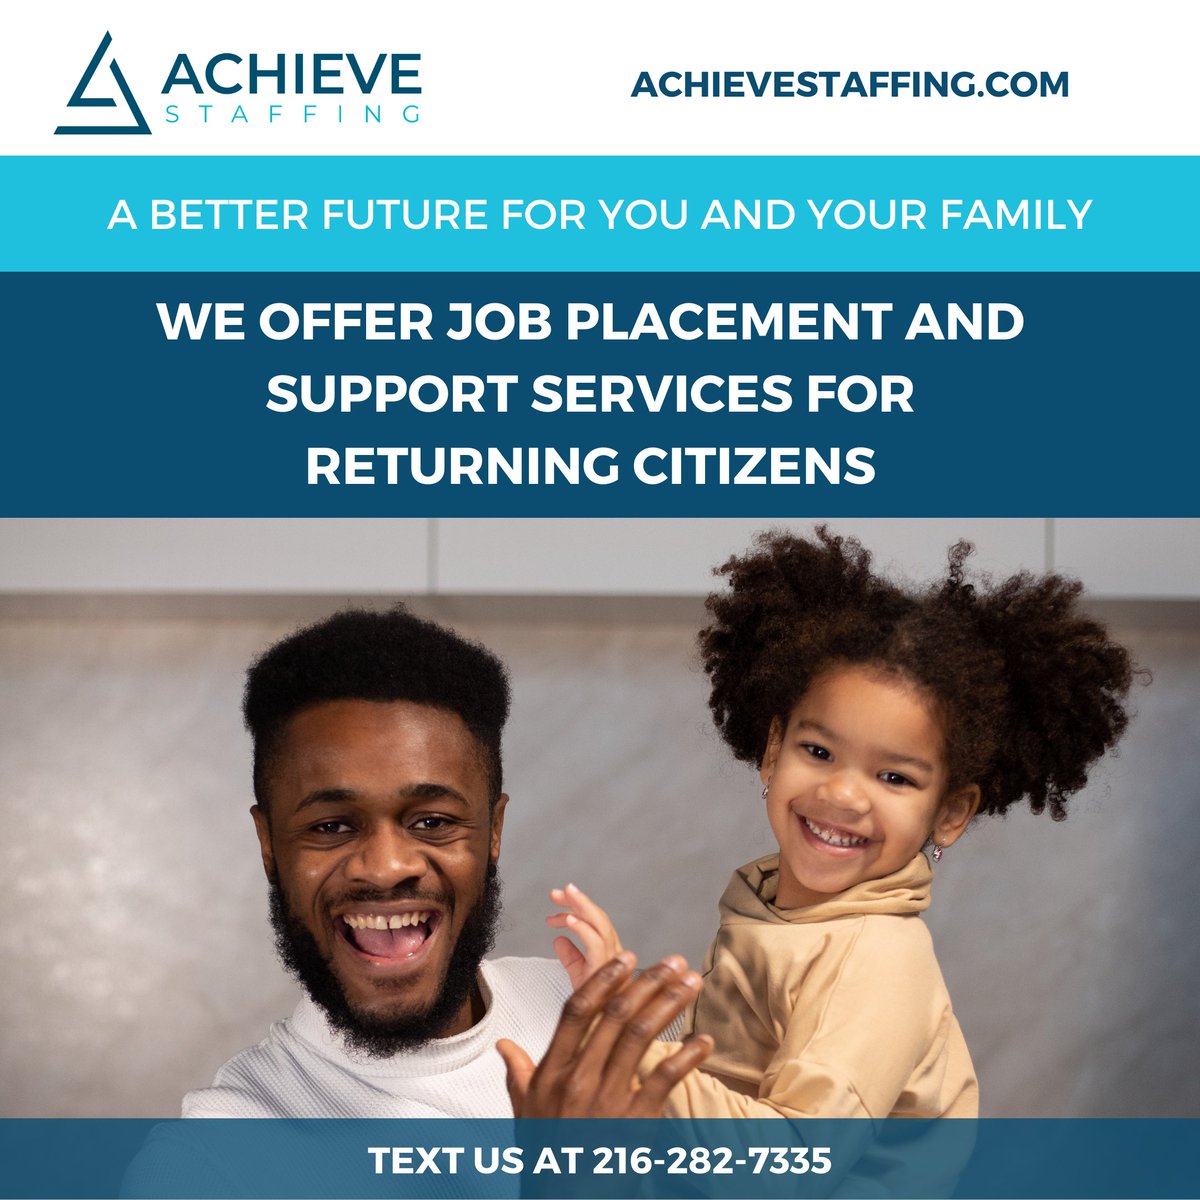 A record or past conviction should not prevent a person from wanting a better future for their family. We work with employers who are ready to give #2ndChances to hard working people. Send us a text at 216-282-7335 or visit bit.ly/3GXDhxw #clejobs #reentryemployment